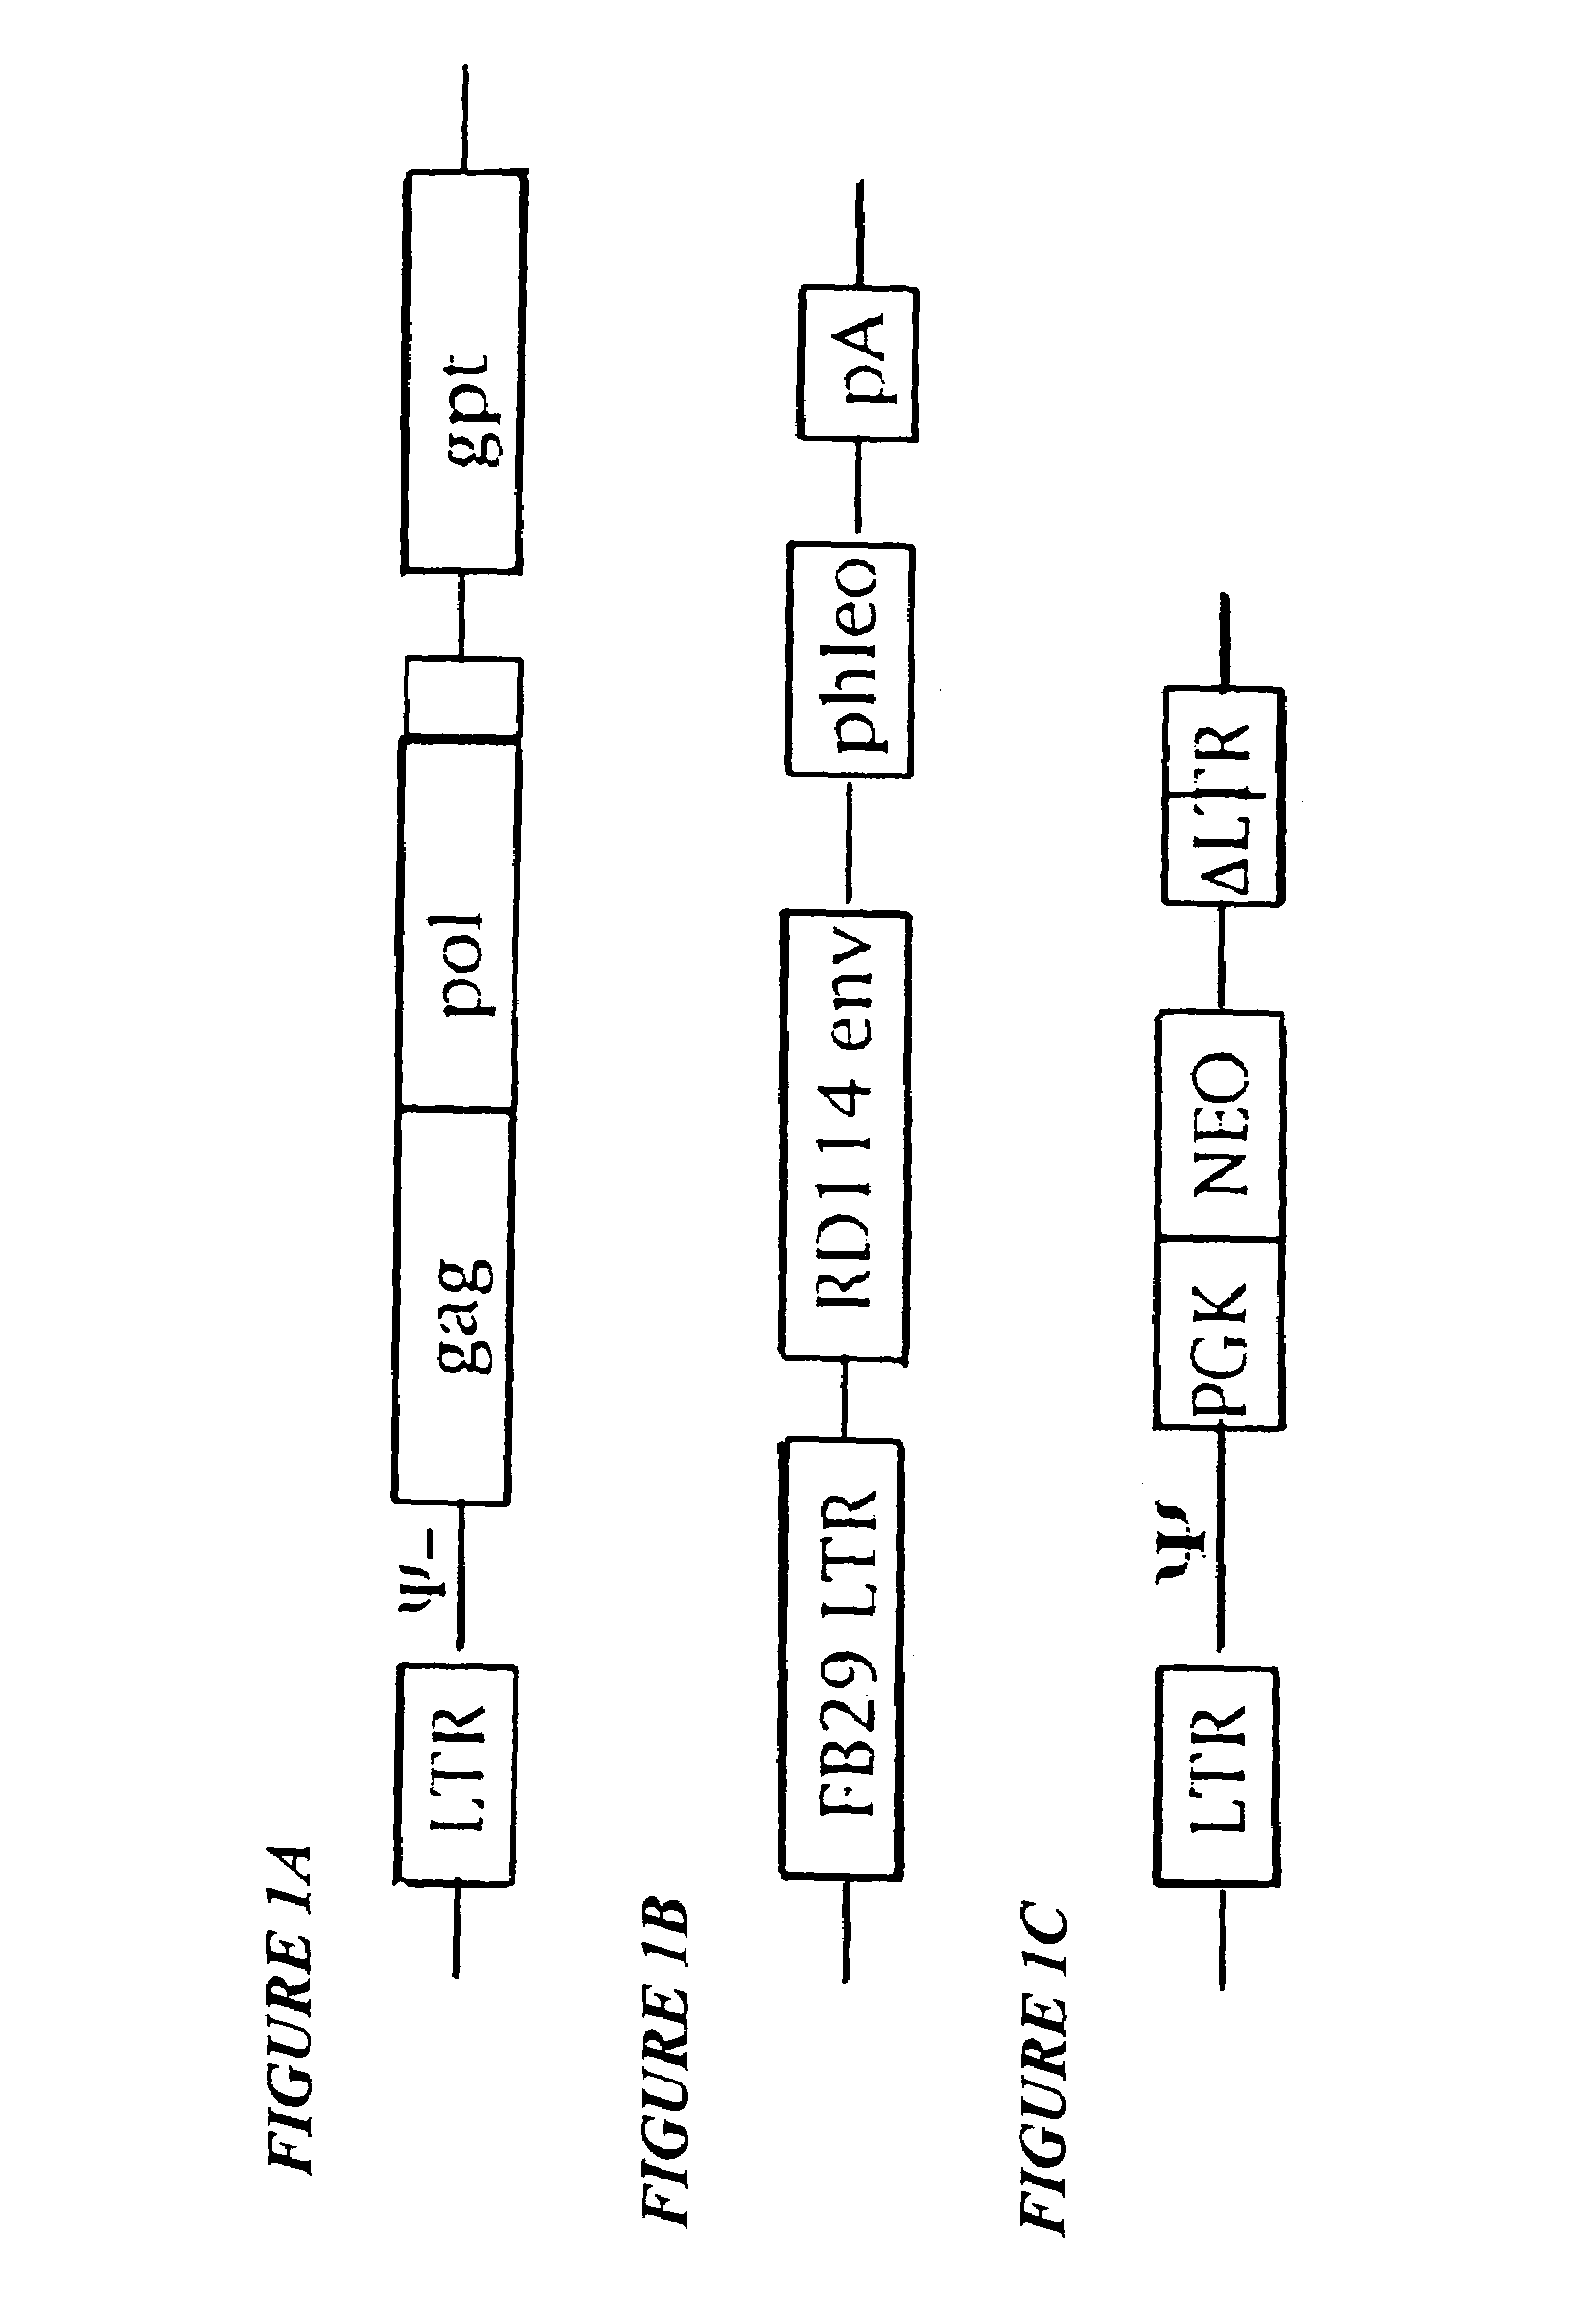 RD114-based retroviral packaging cell line and related compositions and methods